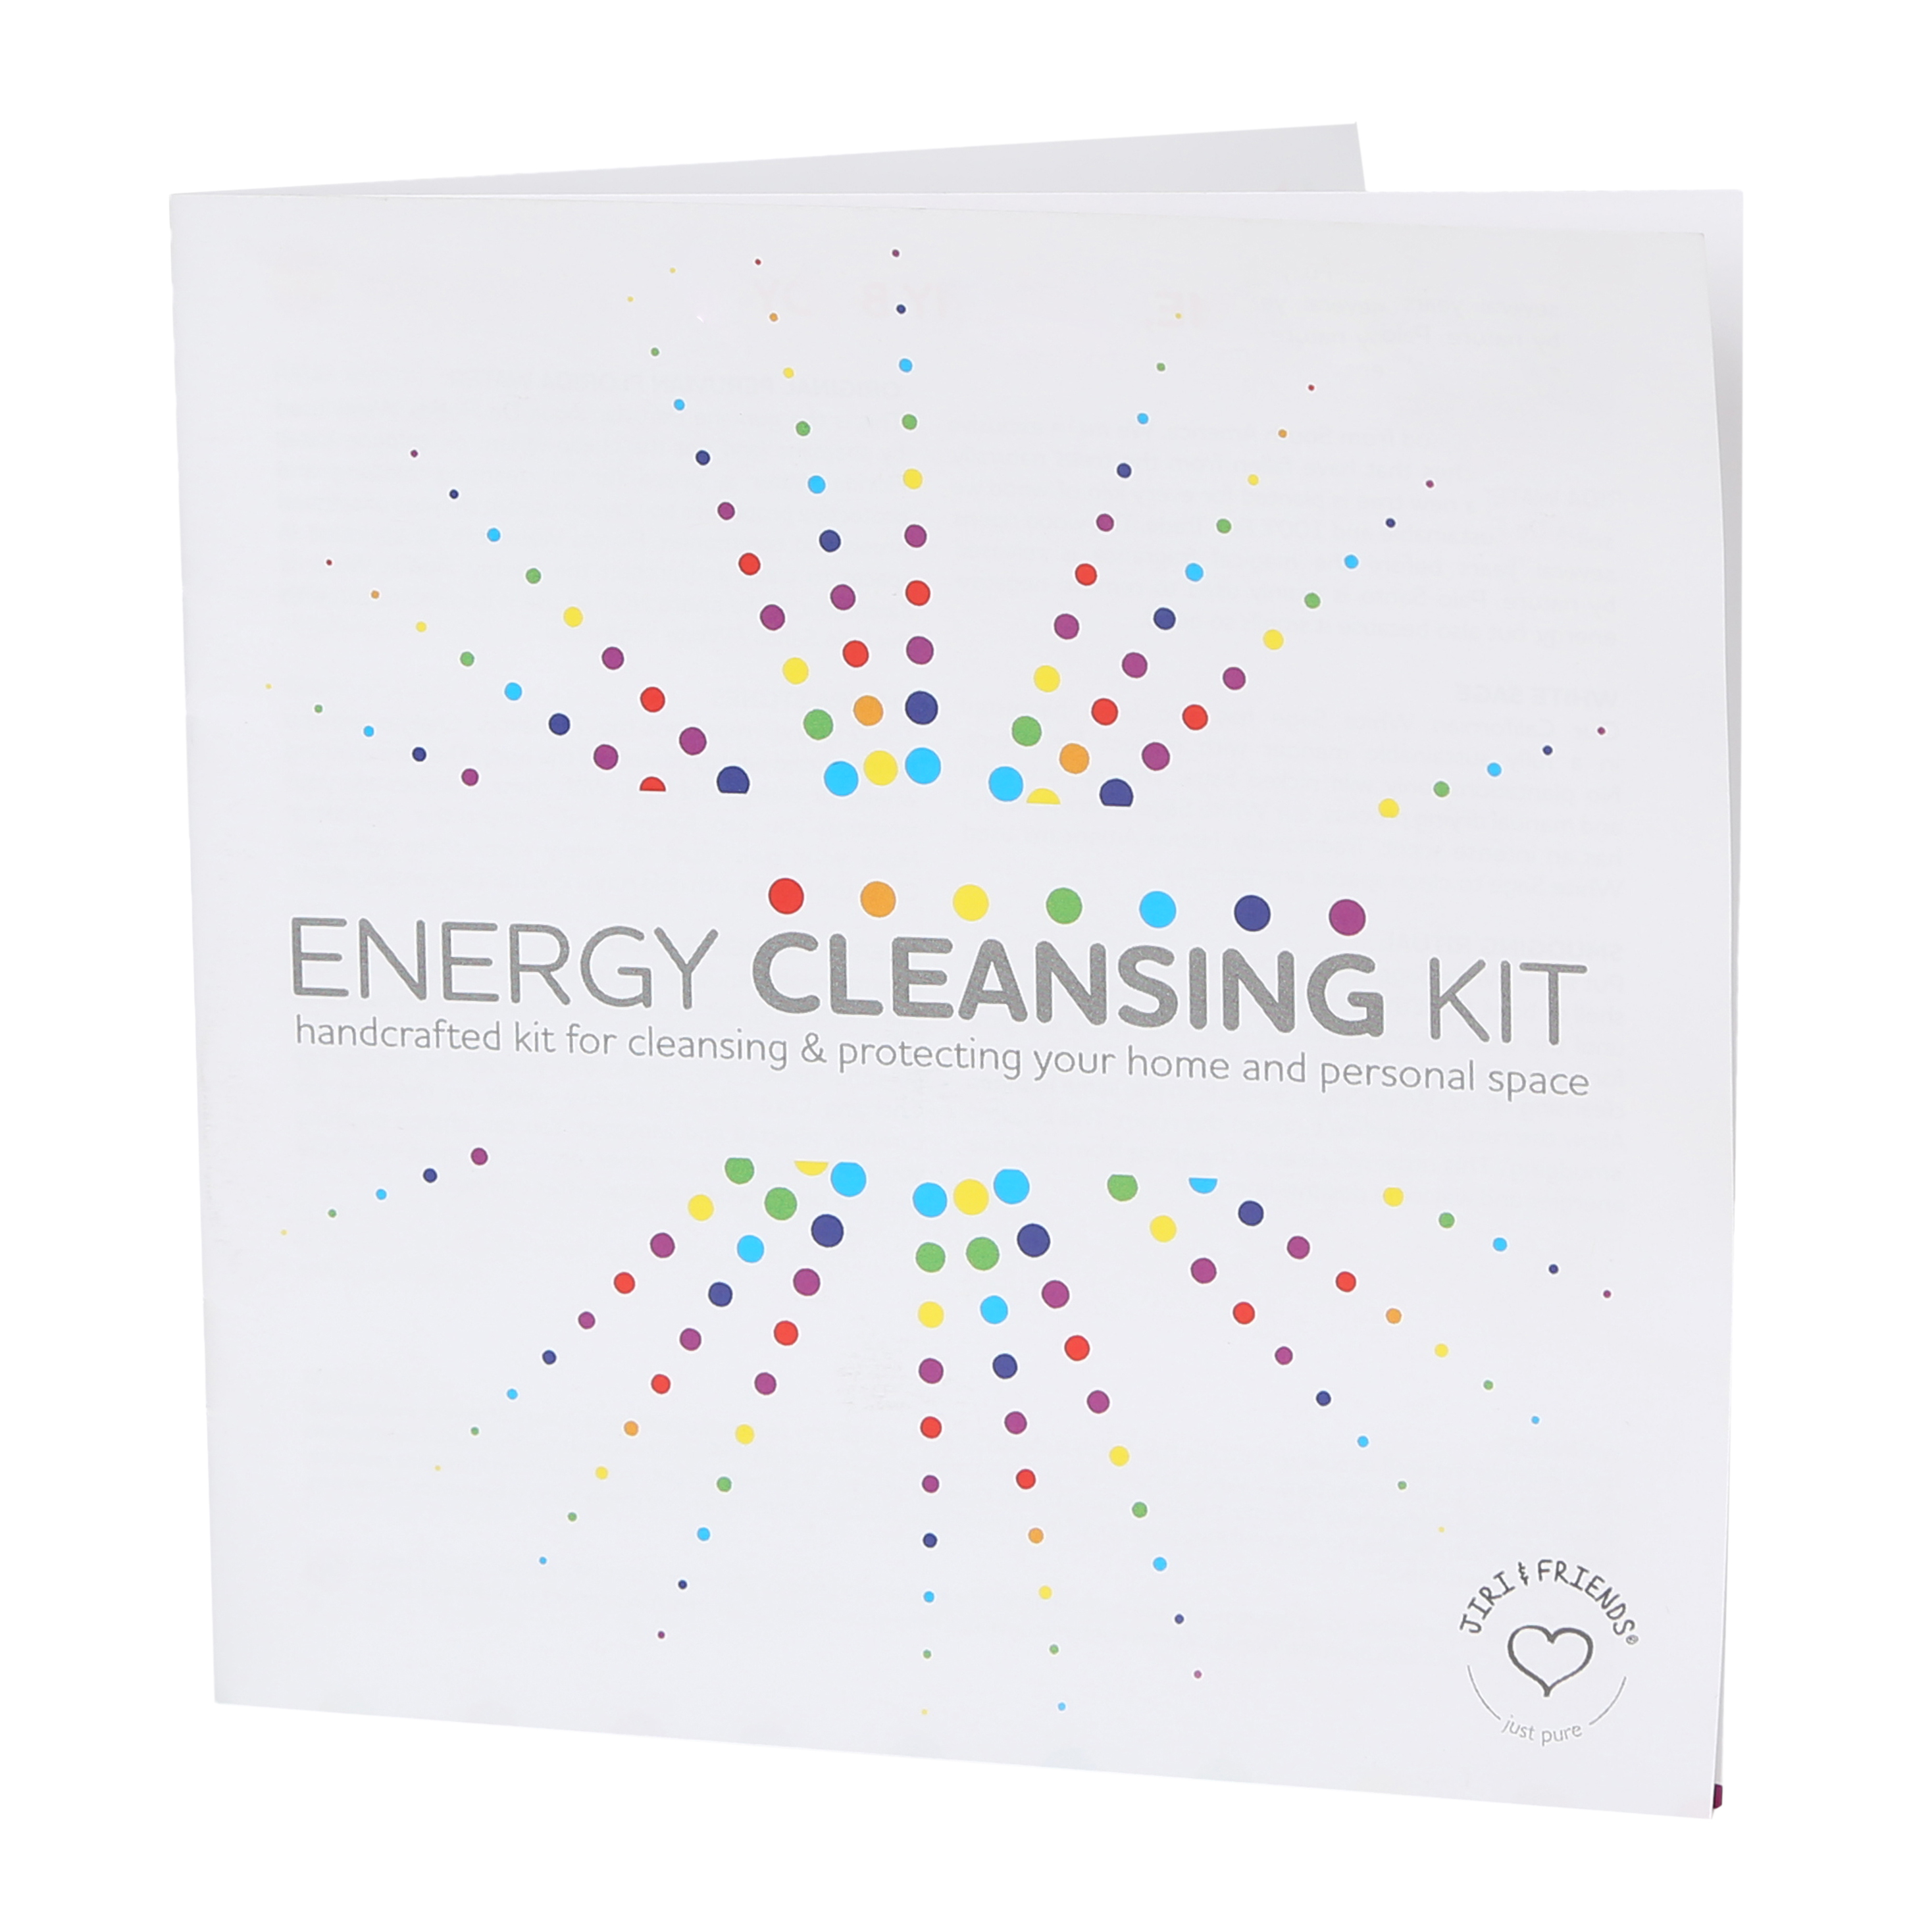 ENERGY CLEANSING KIT (7 parts)